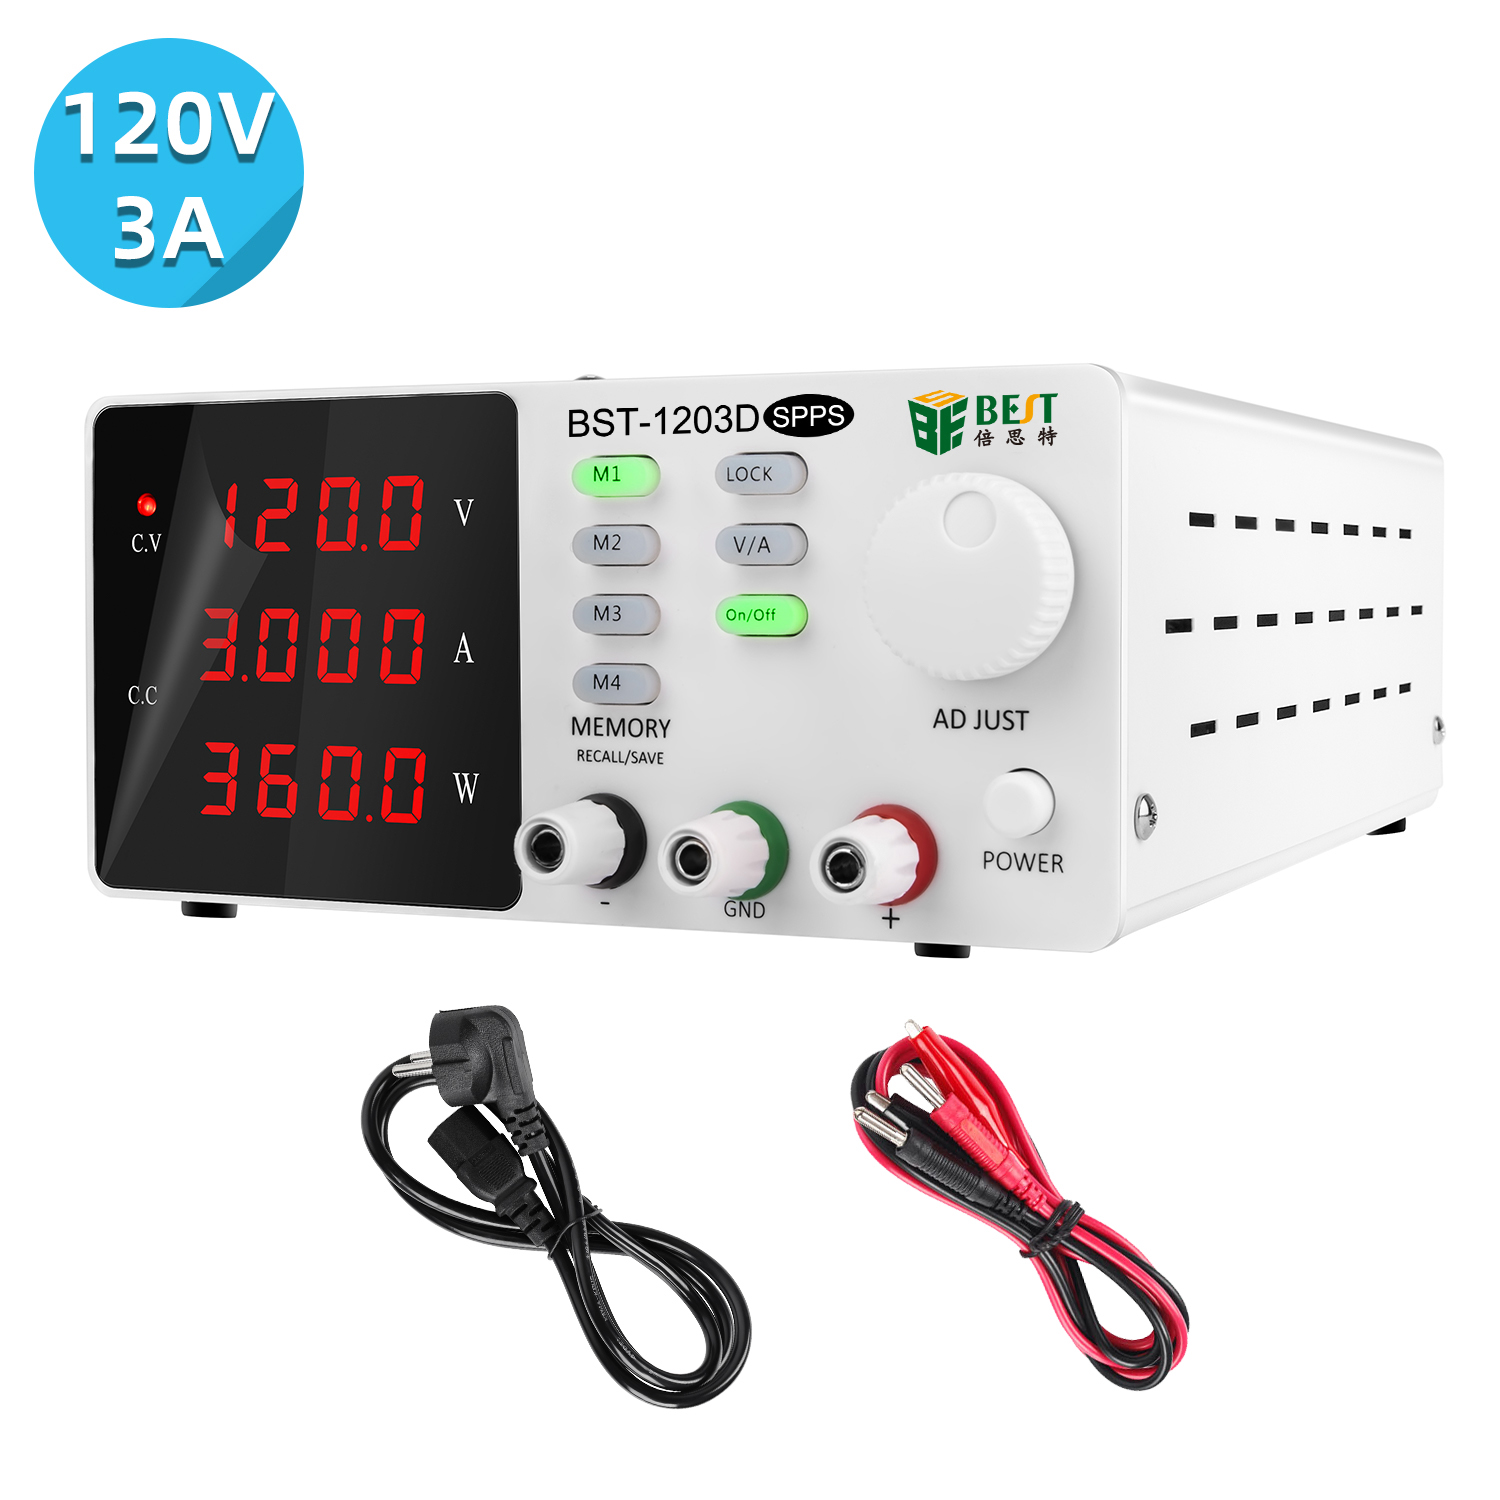 DC Power Supply Variable 120V 3A Adjustable Switching Regulated High Precision 4-Digits LED Display， Bench Lab Power Supplies， Best Tool BST-1203D